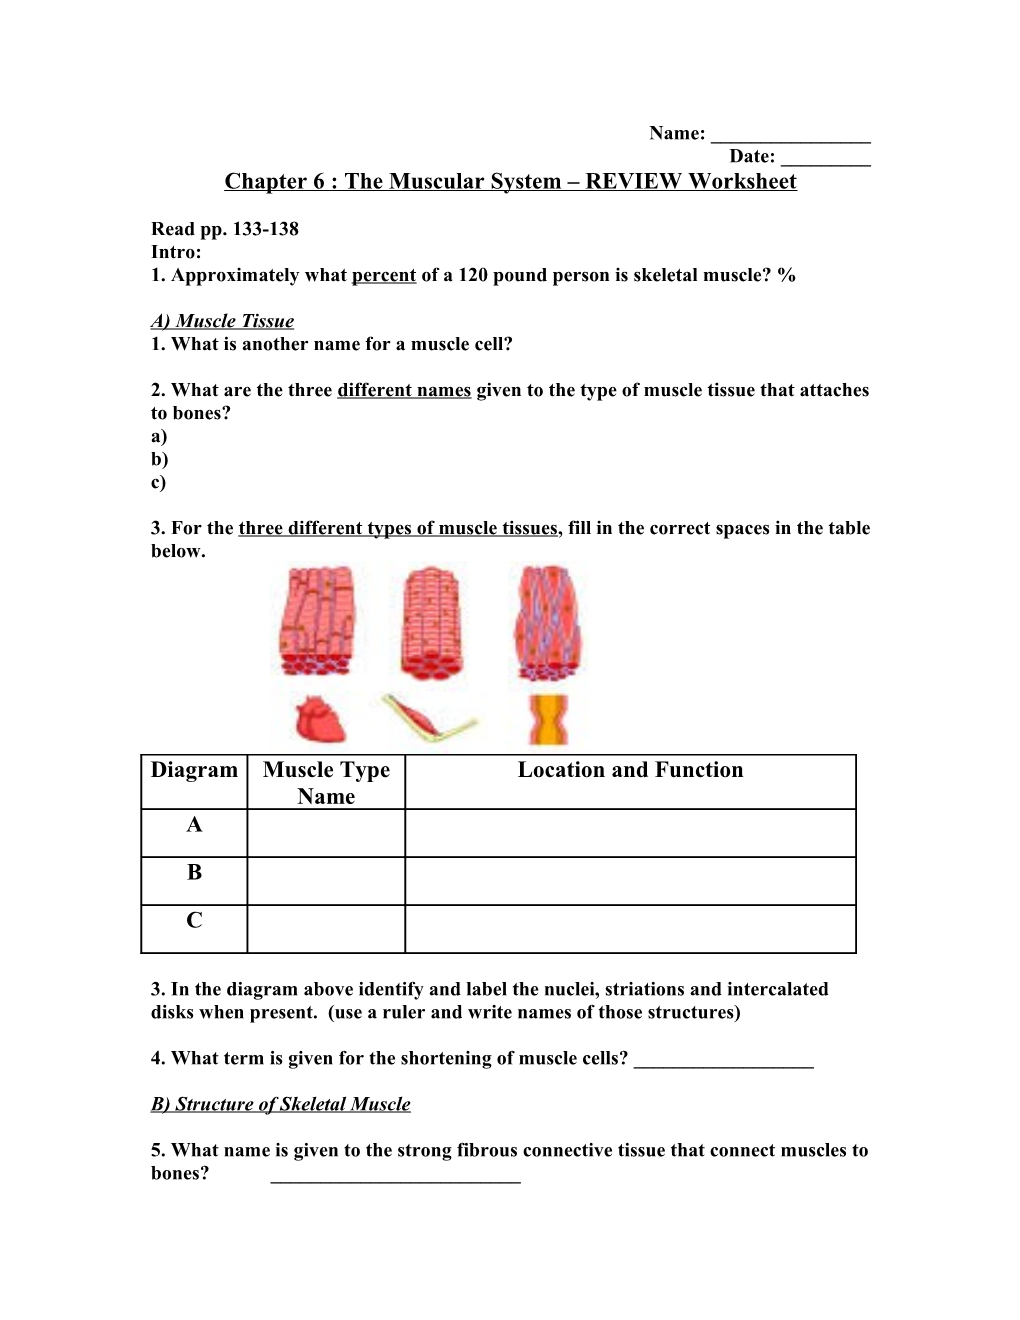 Chapter 6 : the Muscular System REVIEW Worksheet